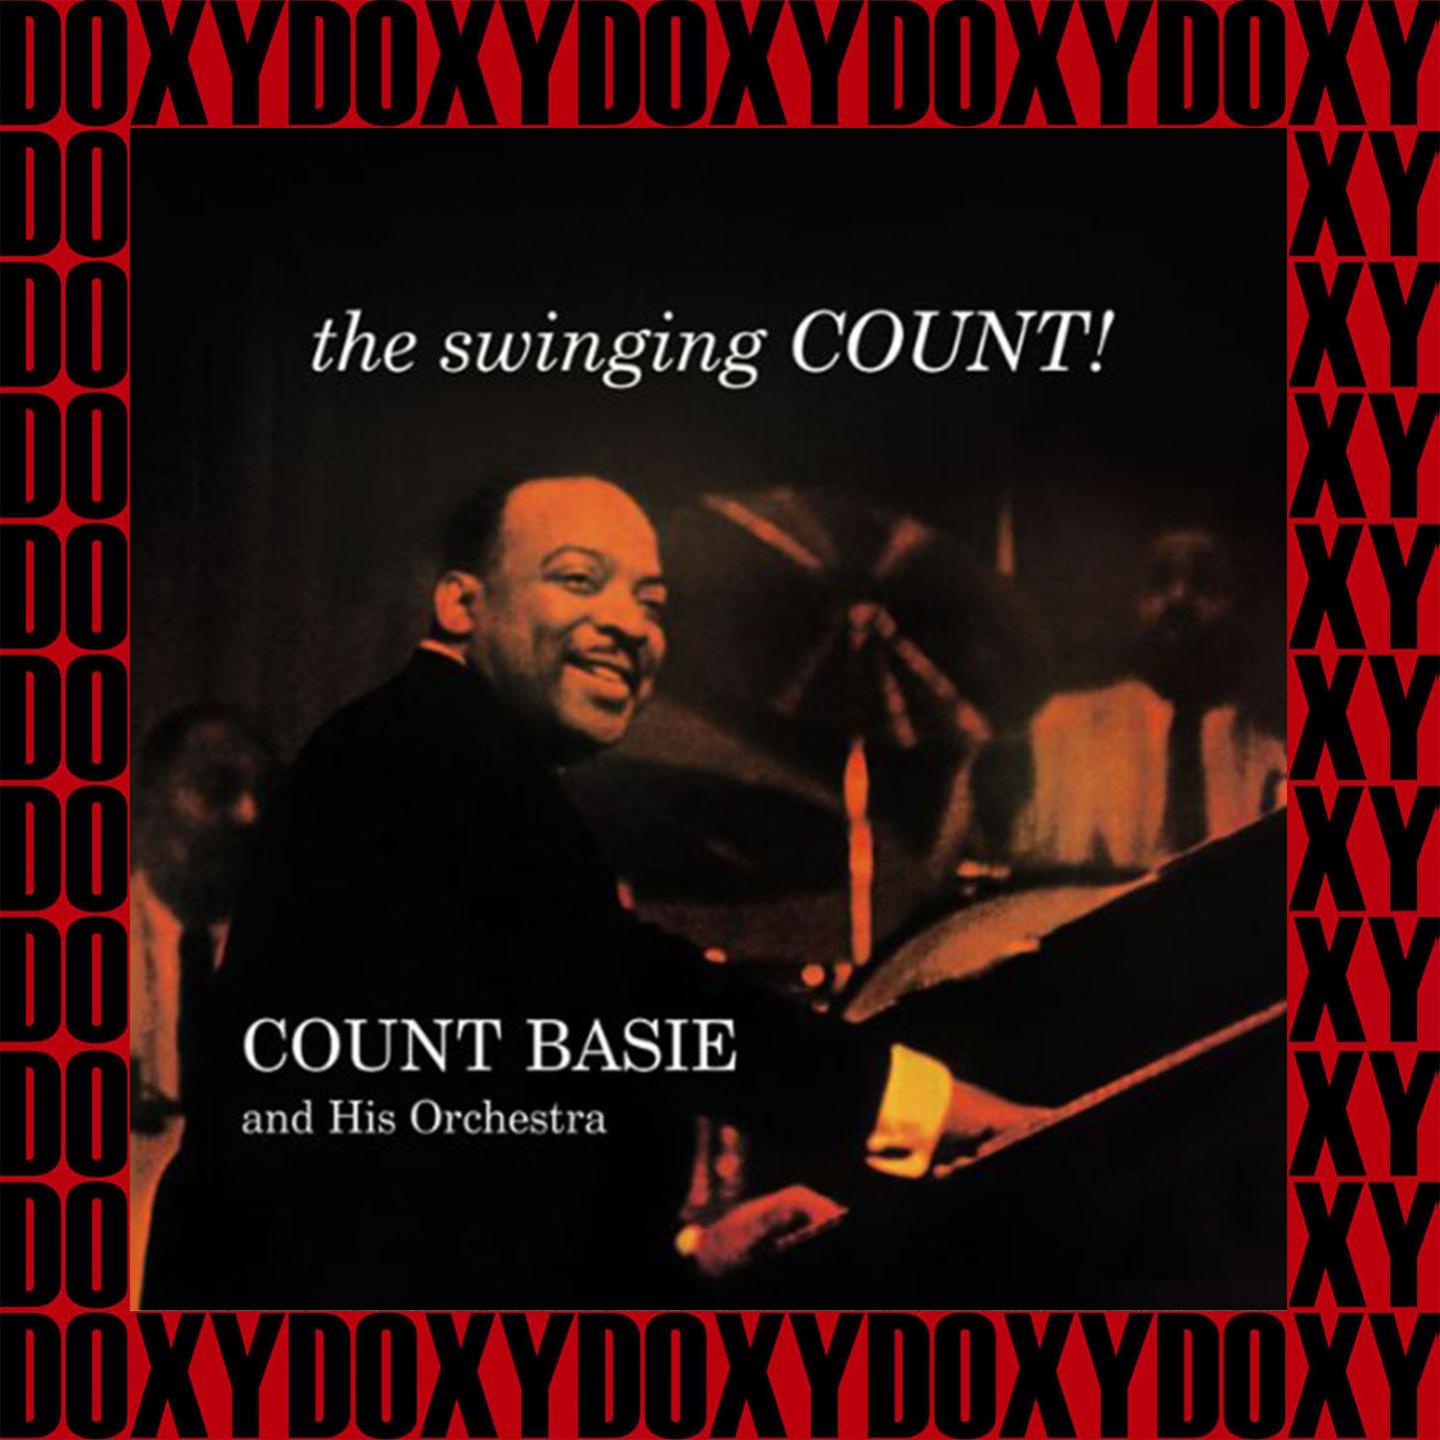 The Swinging Count! (Remastered Version) (Doxy Collection)